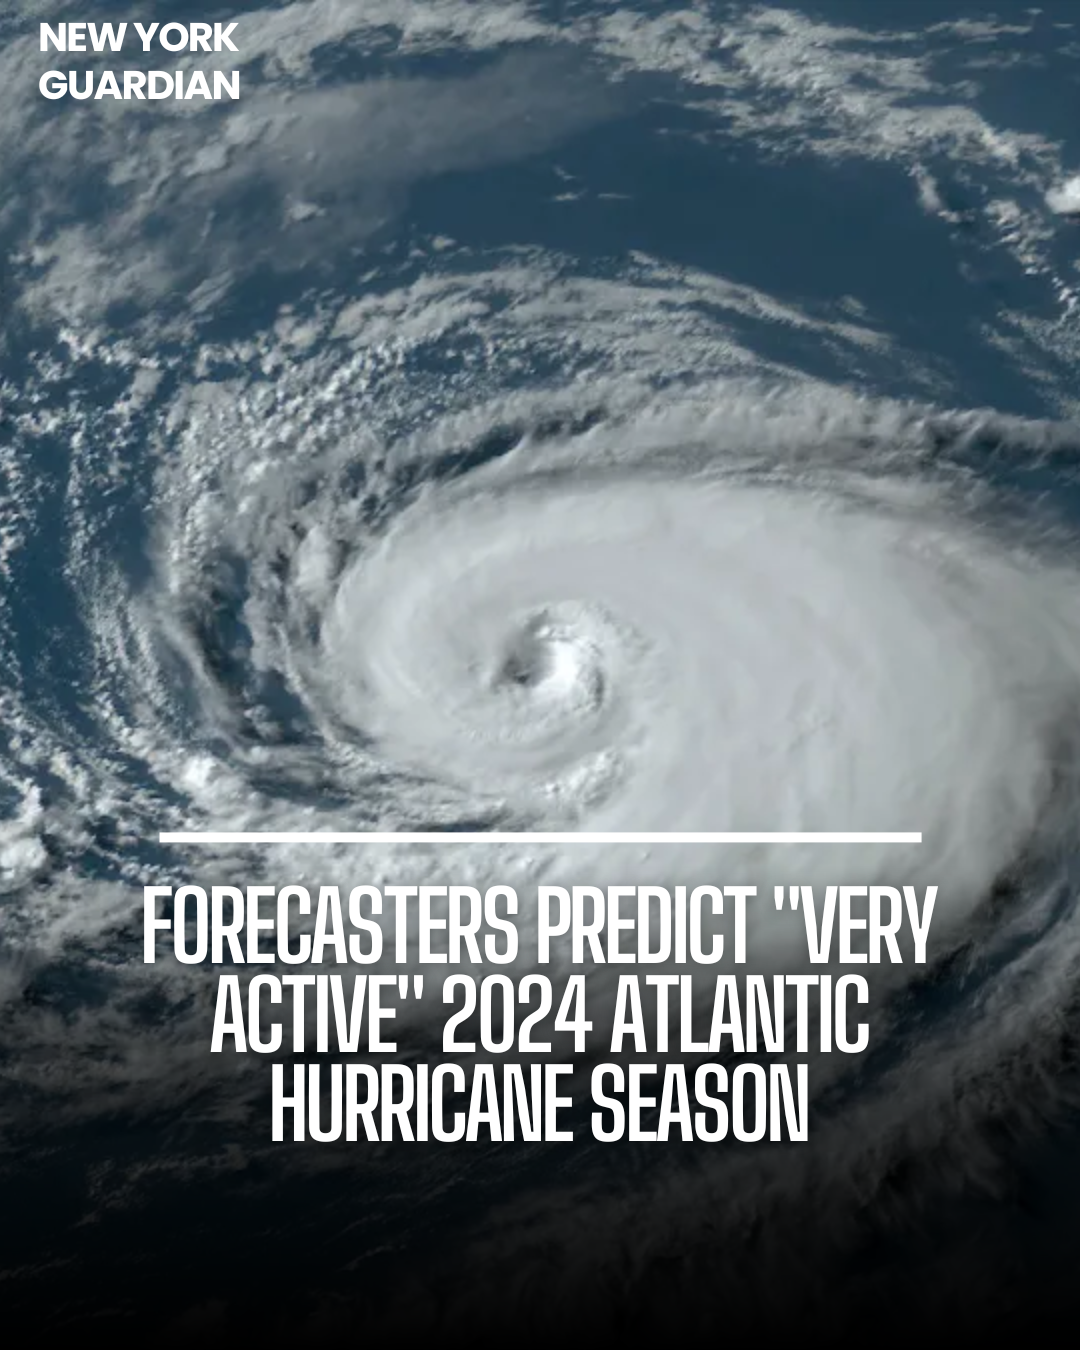 Forecasters forecast a "very active" 2024 Atlantic hurricane season, with projections showing the production of 23 named storms.